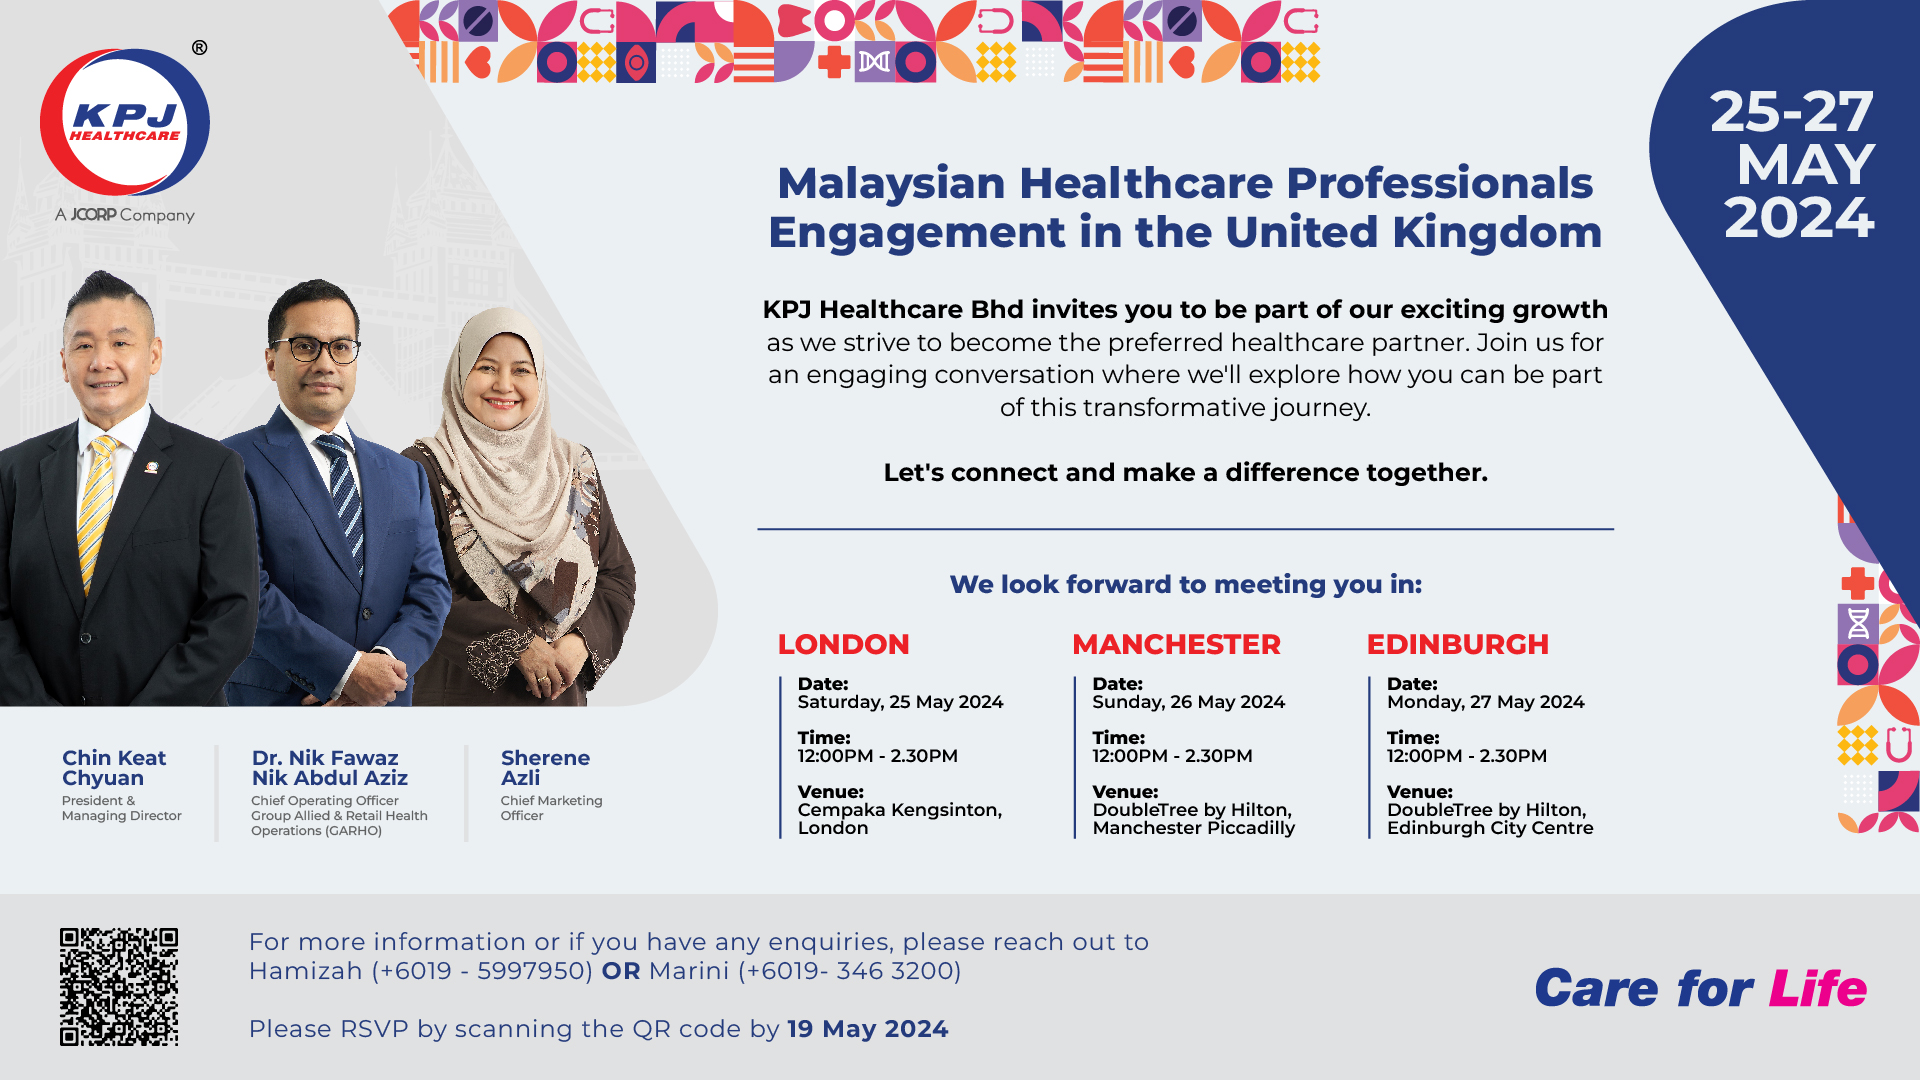 Malaysian Healthcare Professionals Engagement in Manchester